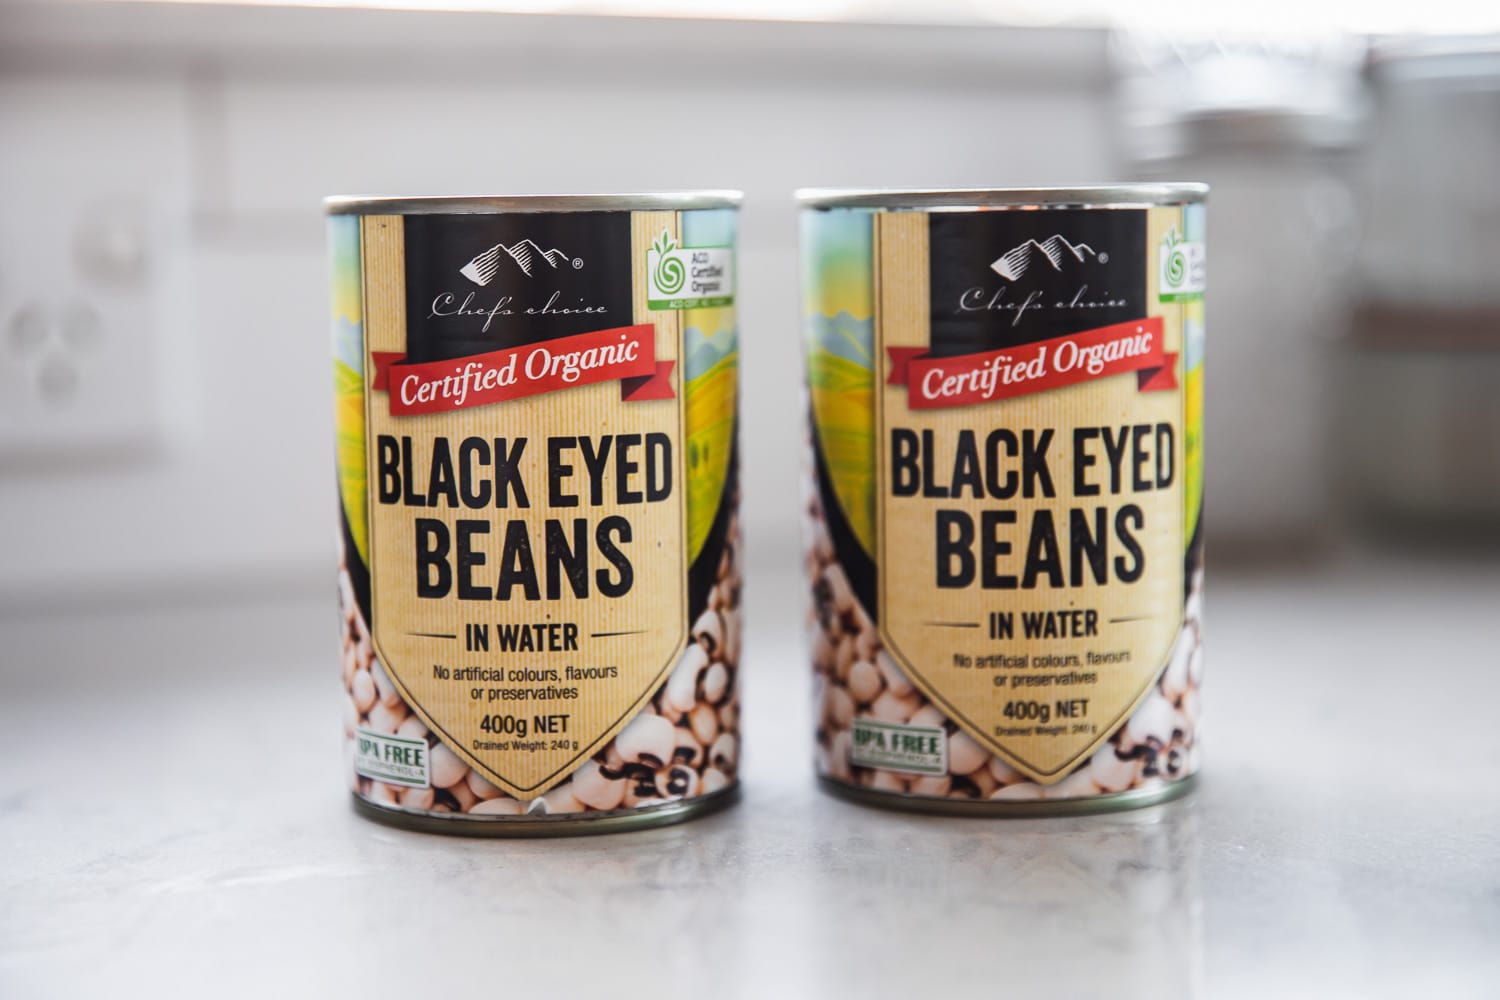 Two cans of Black-eyed peas on a kitchen counter